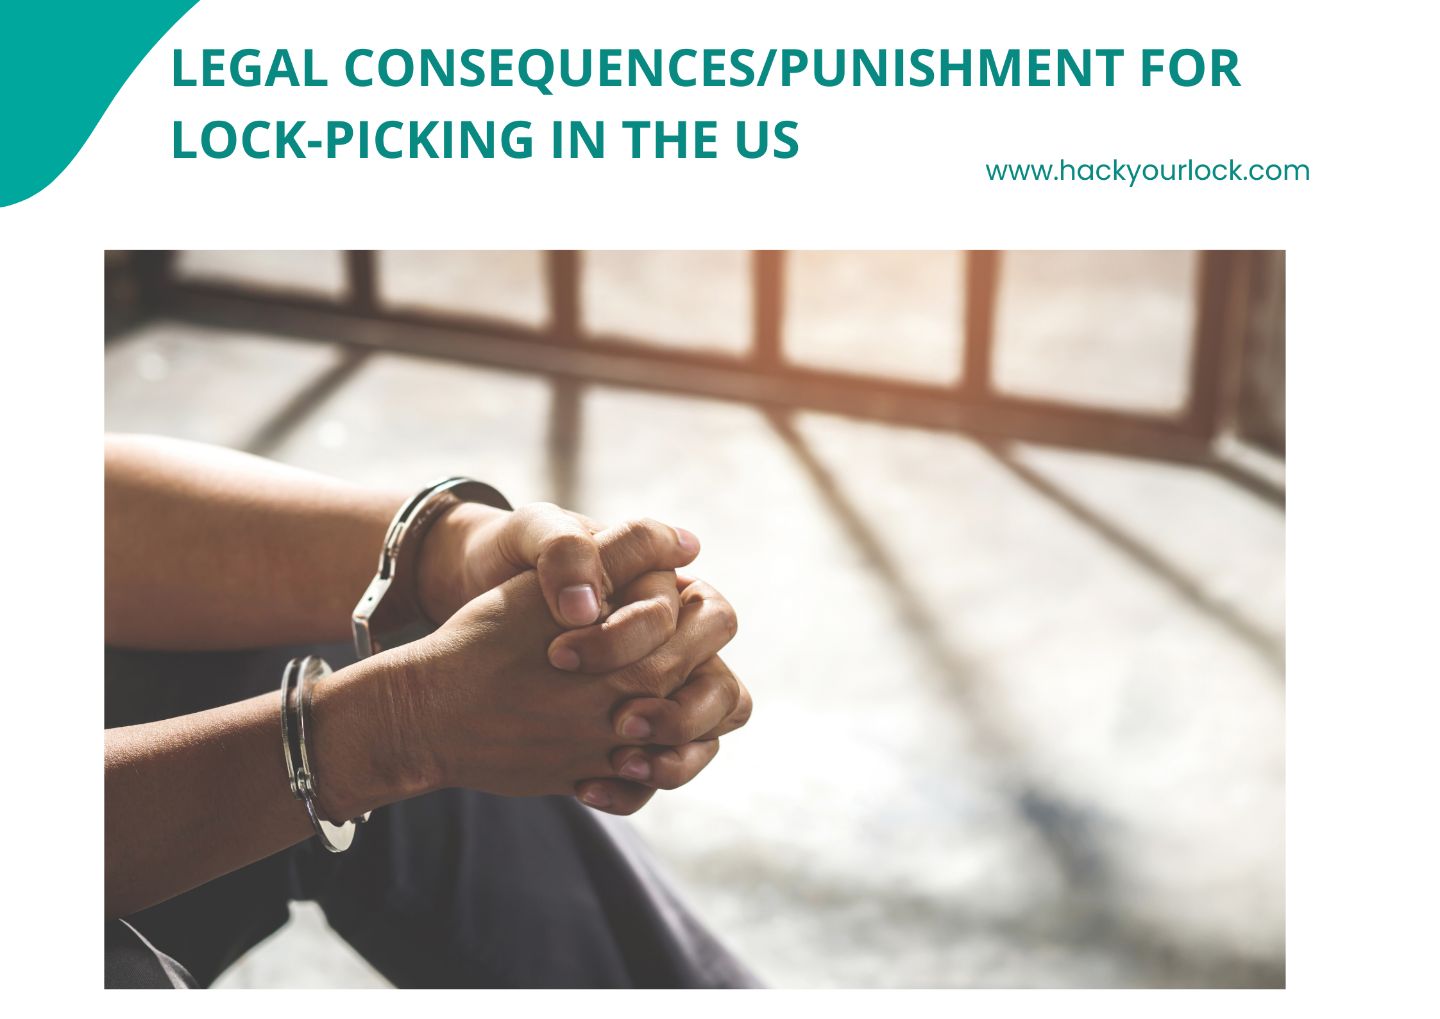 legal consequences of lock picking in Colorado state of the USA, shown symbolically with a man handcuffed sitting behind jail bars